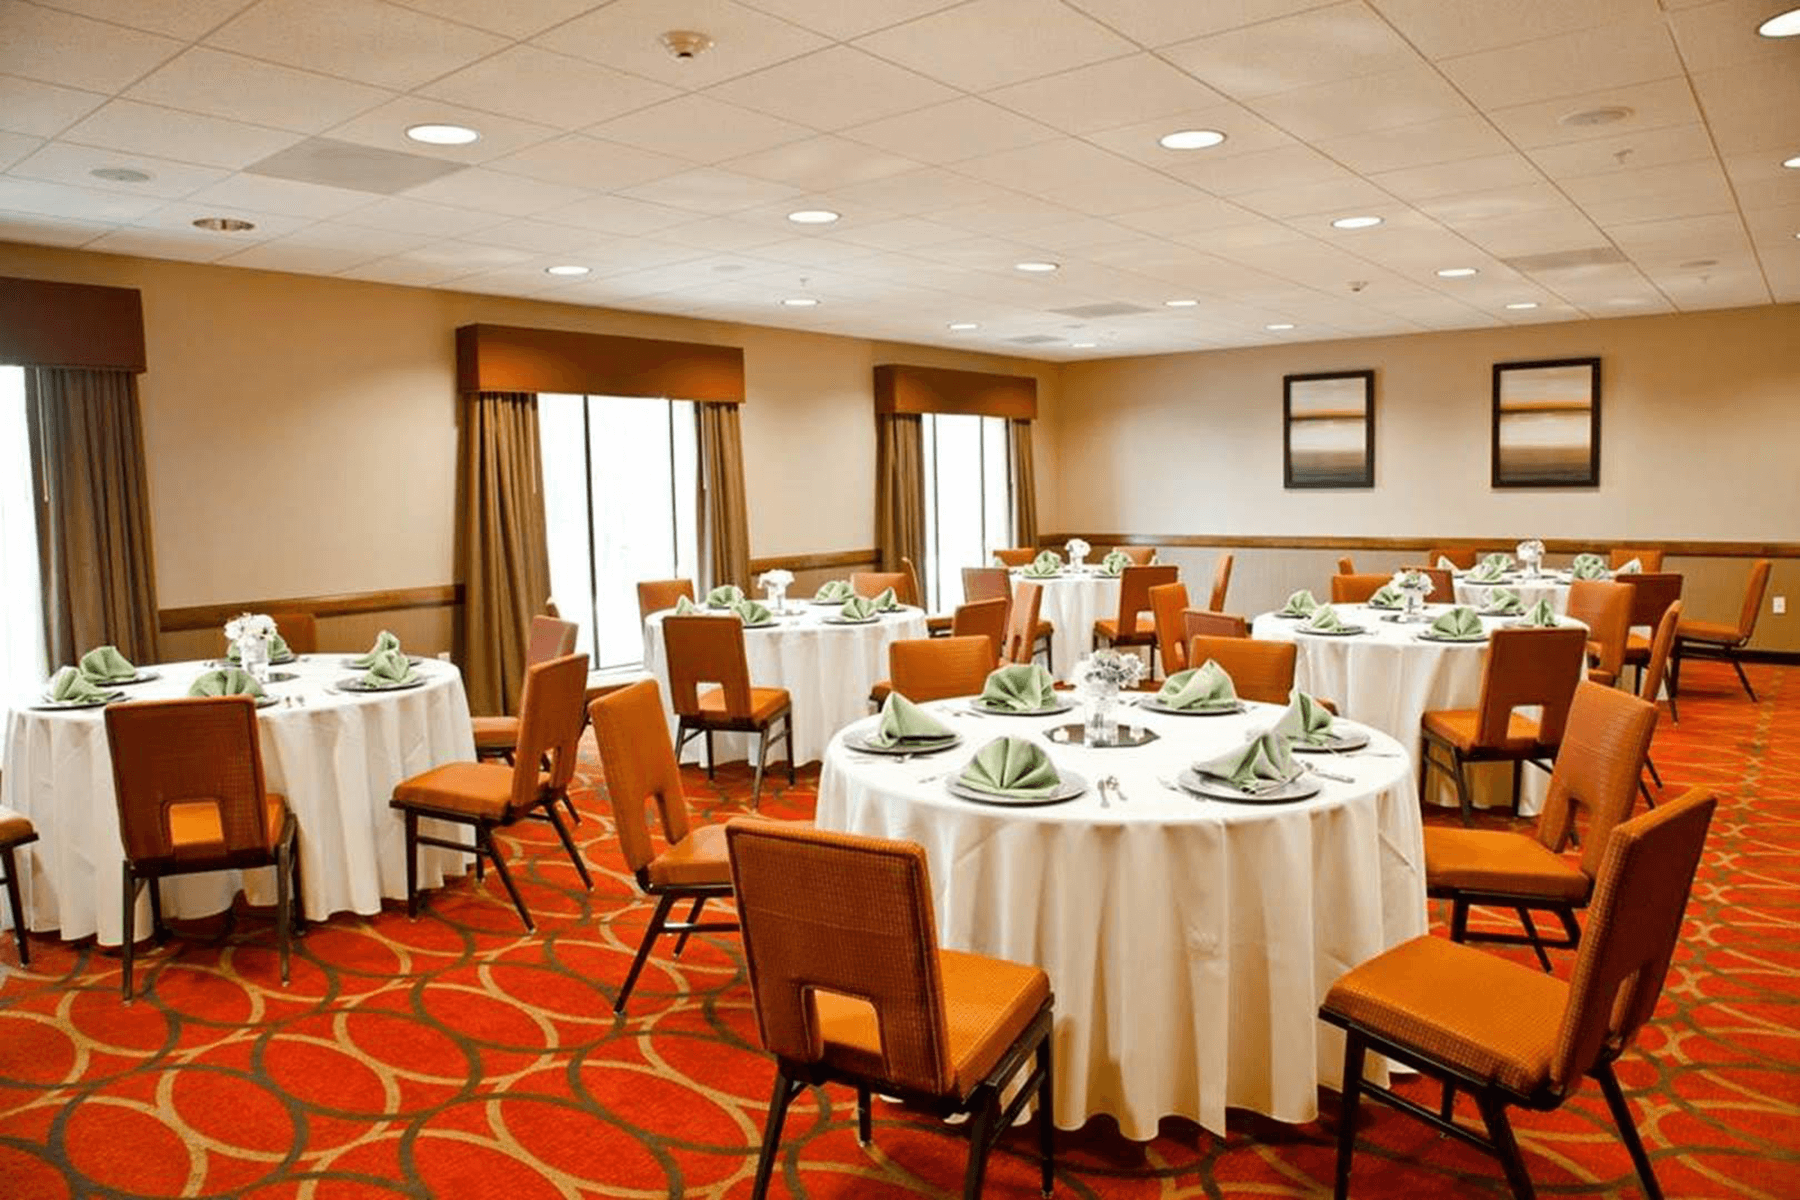  Hampton Inn and Suites Salinas interior meeting room with set round tables 